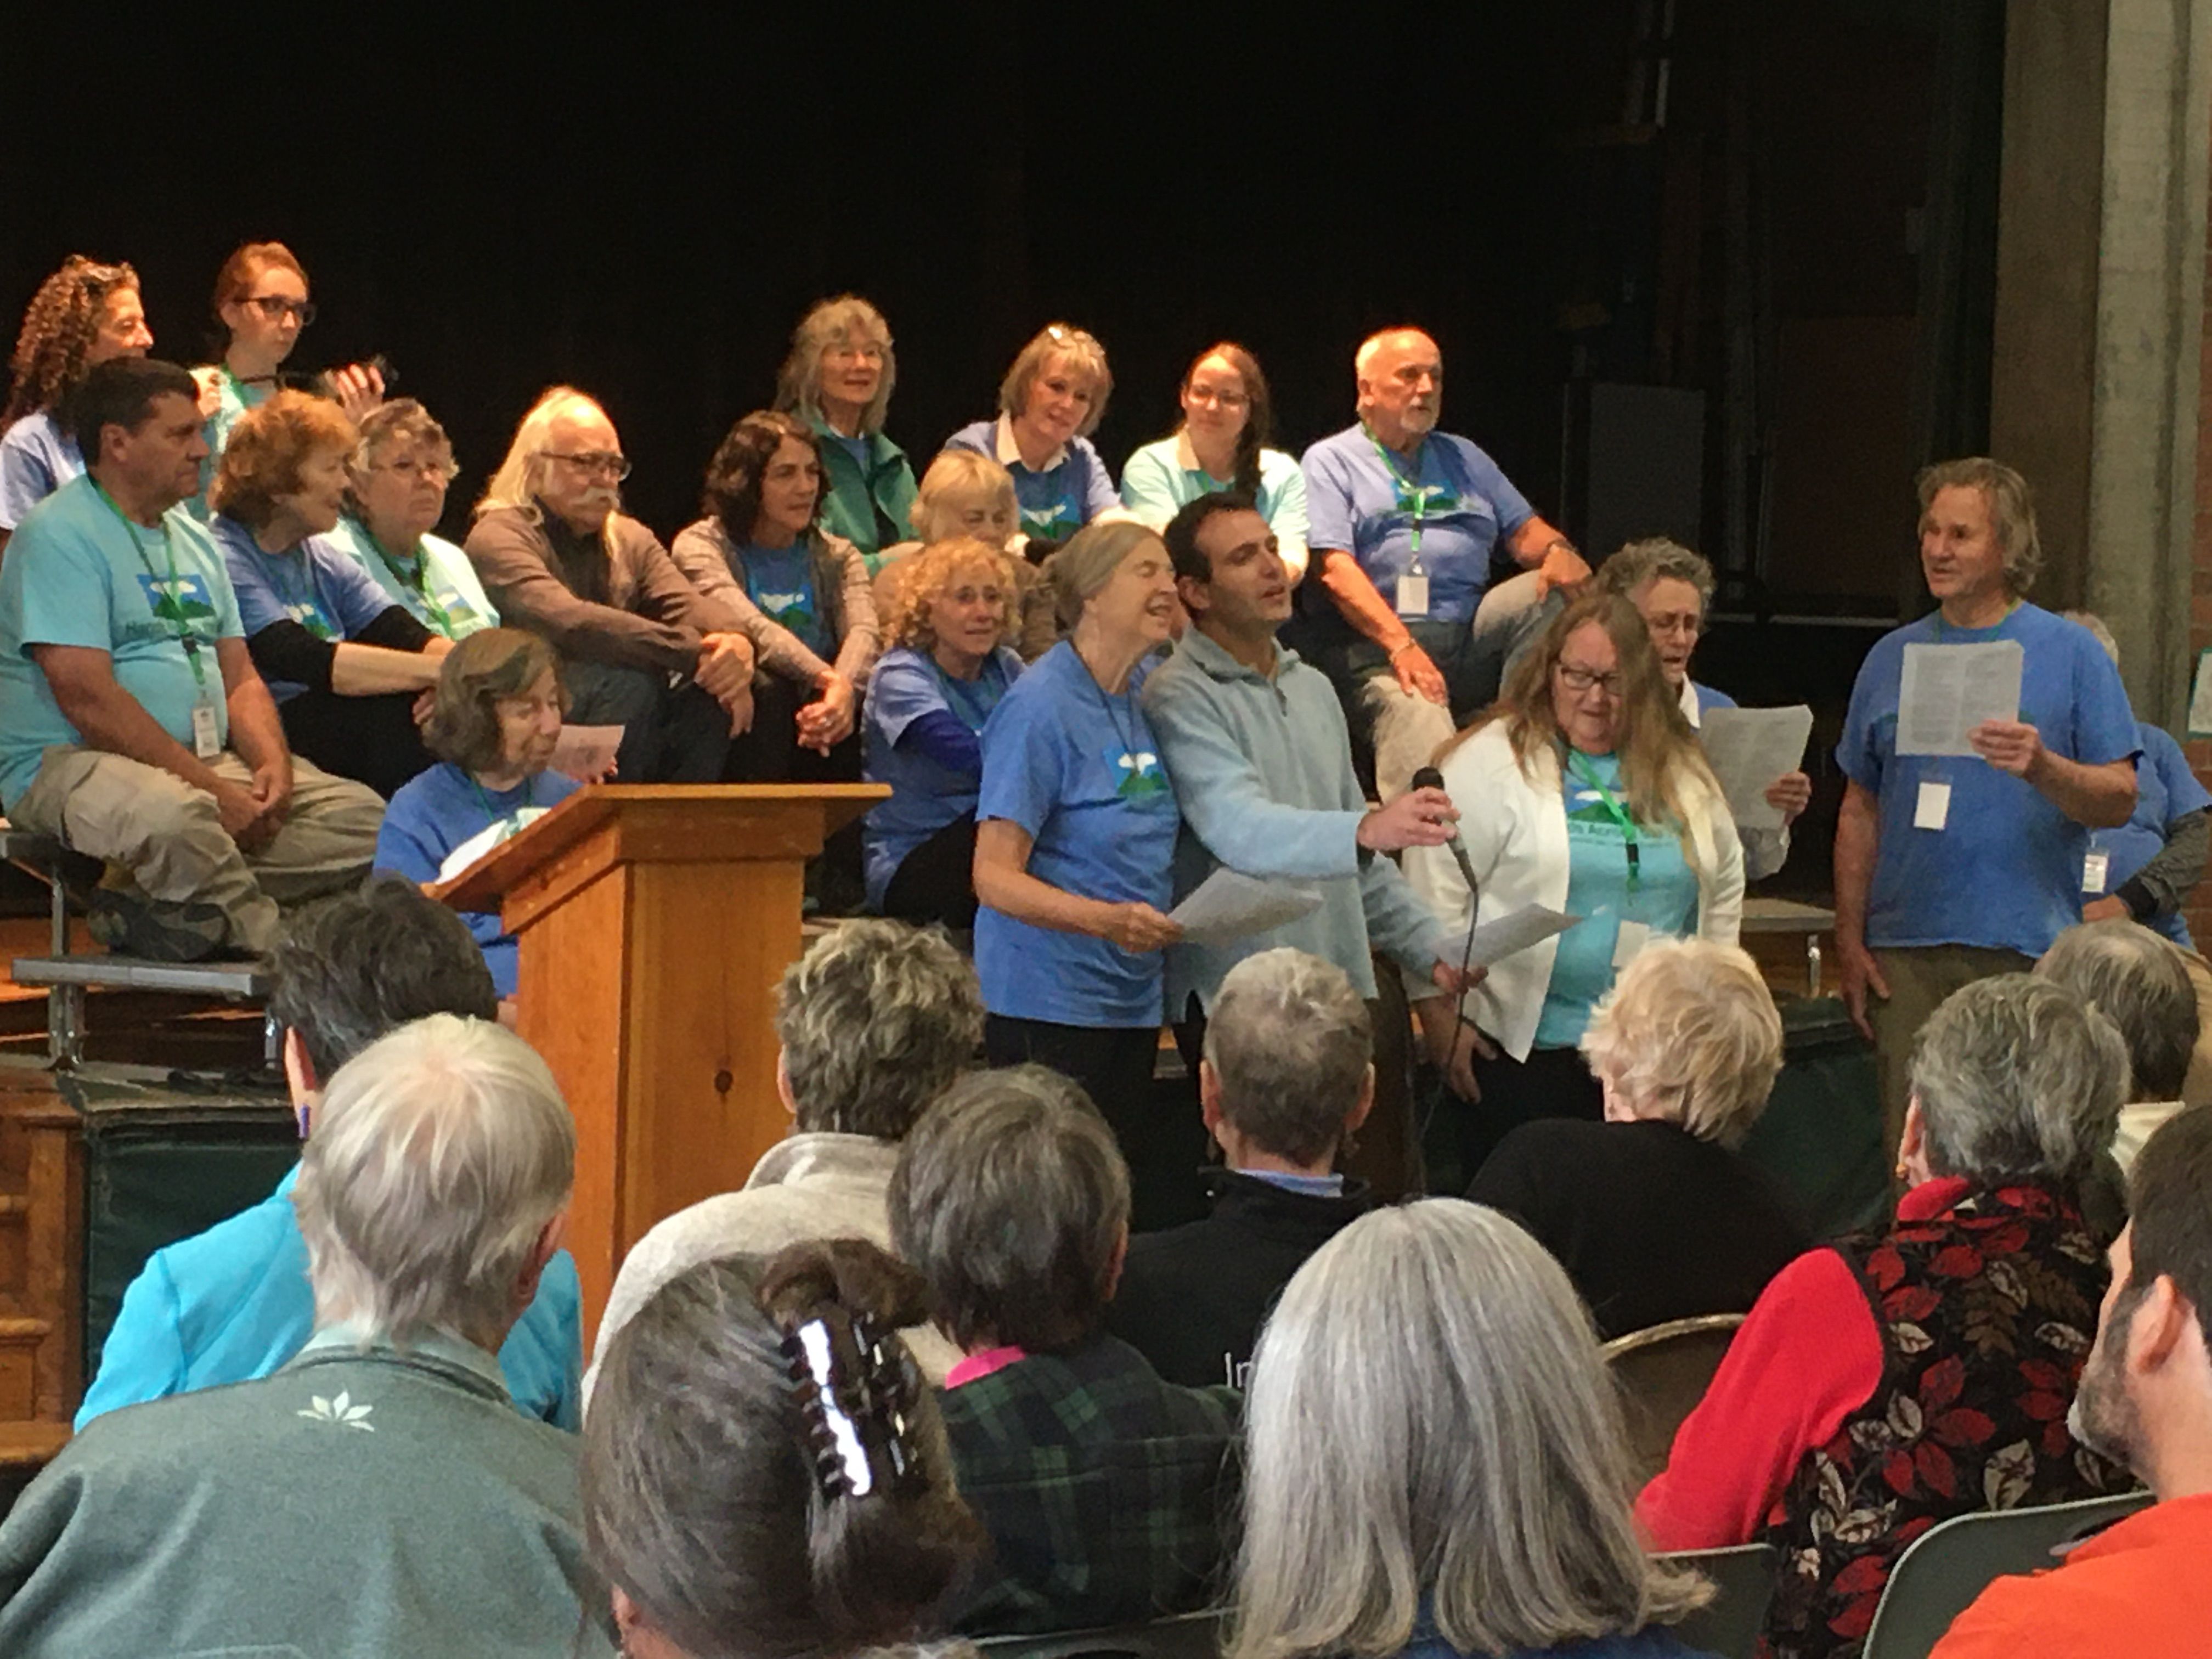 Hands Across the Hills participants sing at public forum in Leverett Elementary School’s auditorium as other group members from Kentucky and Leverett look on. Image by Richie Davis. United States, 2019.